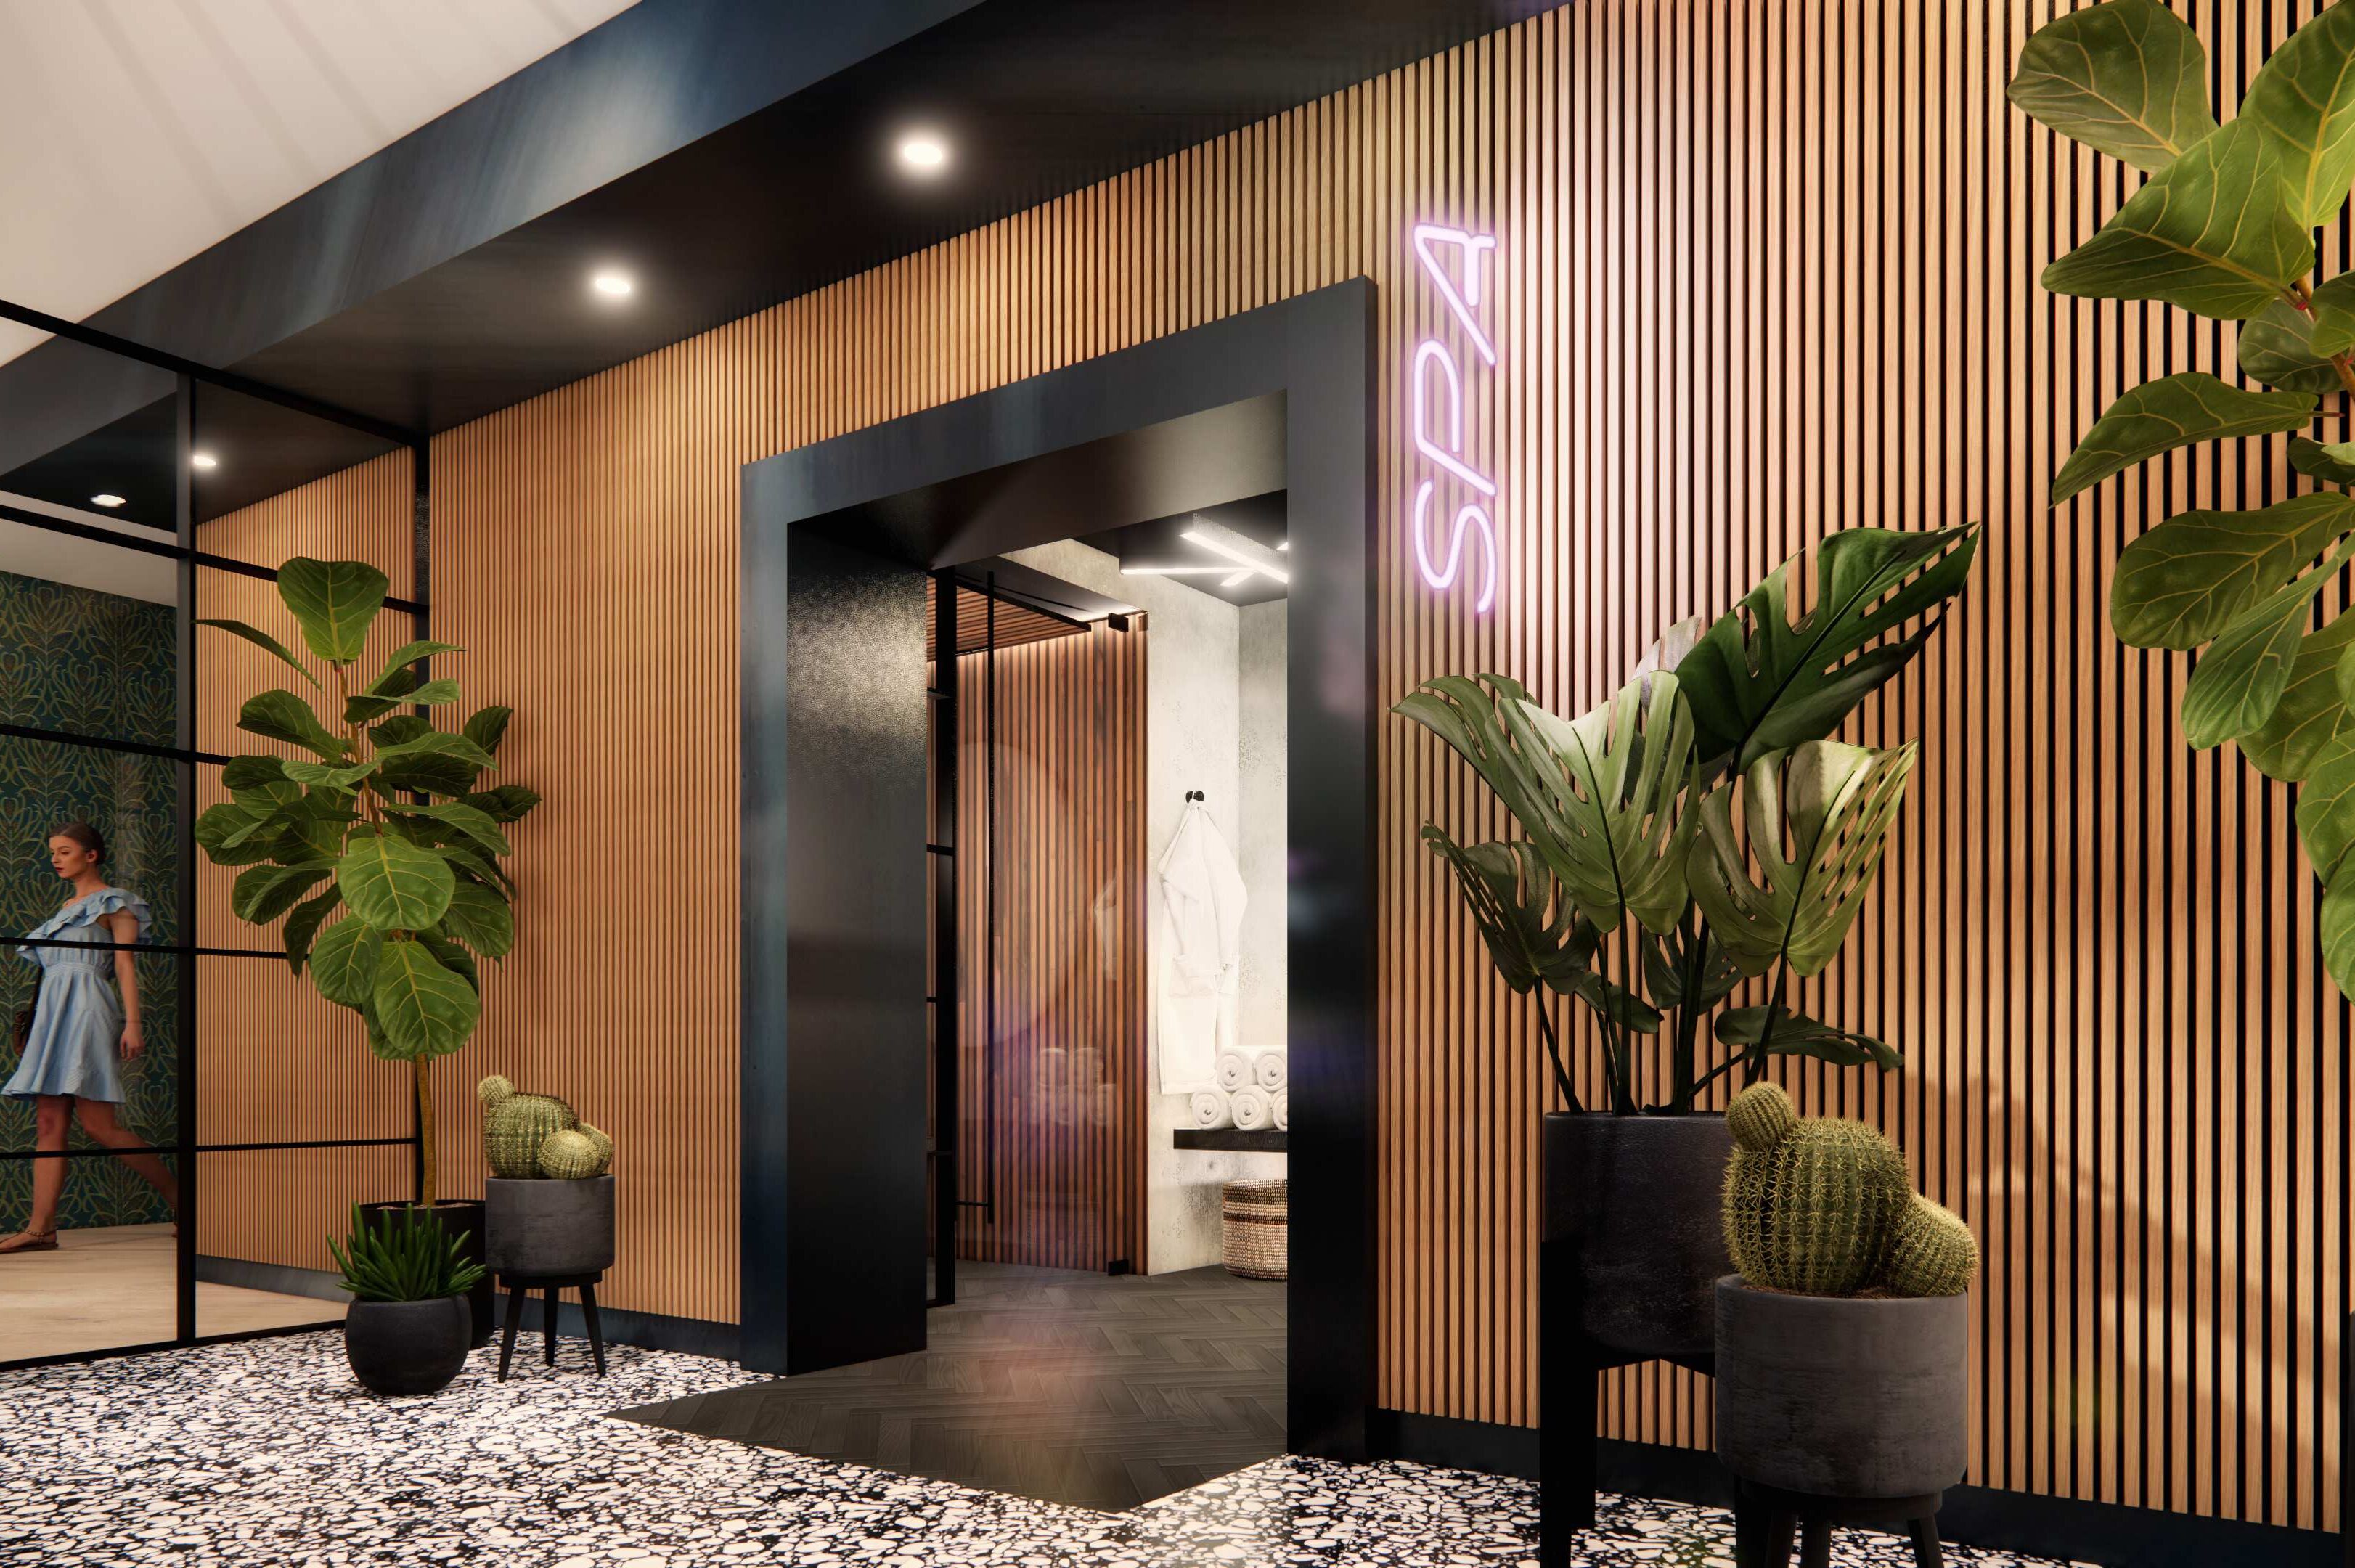 rendering of entry to sauna with spa sign Waterloo Tower, student housing apartment in West Campus near UT Austin.